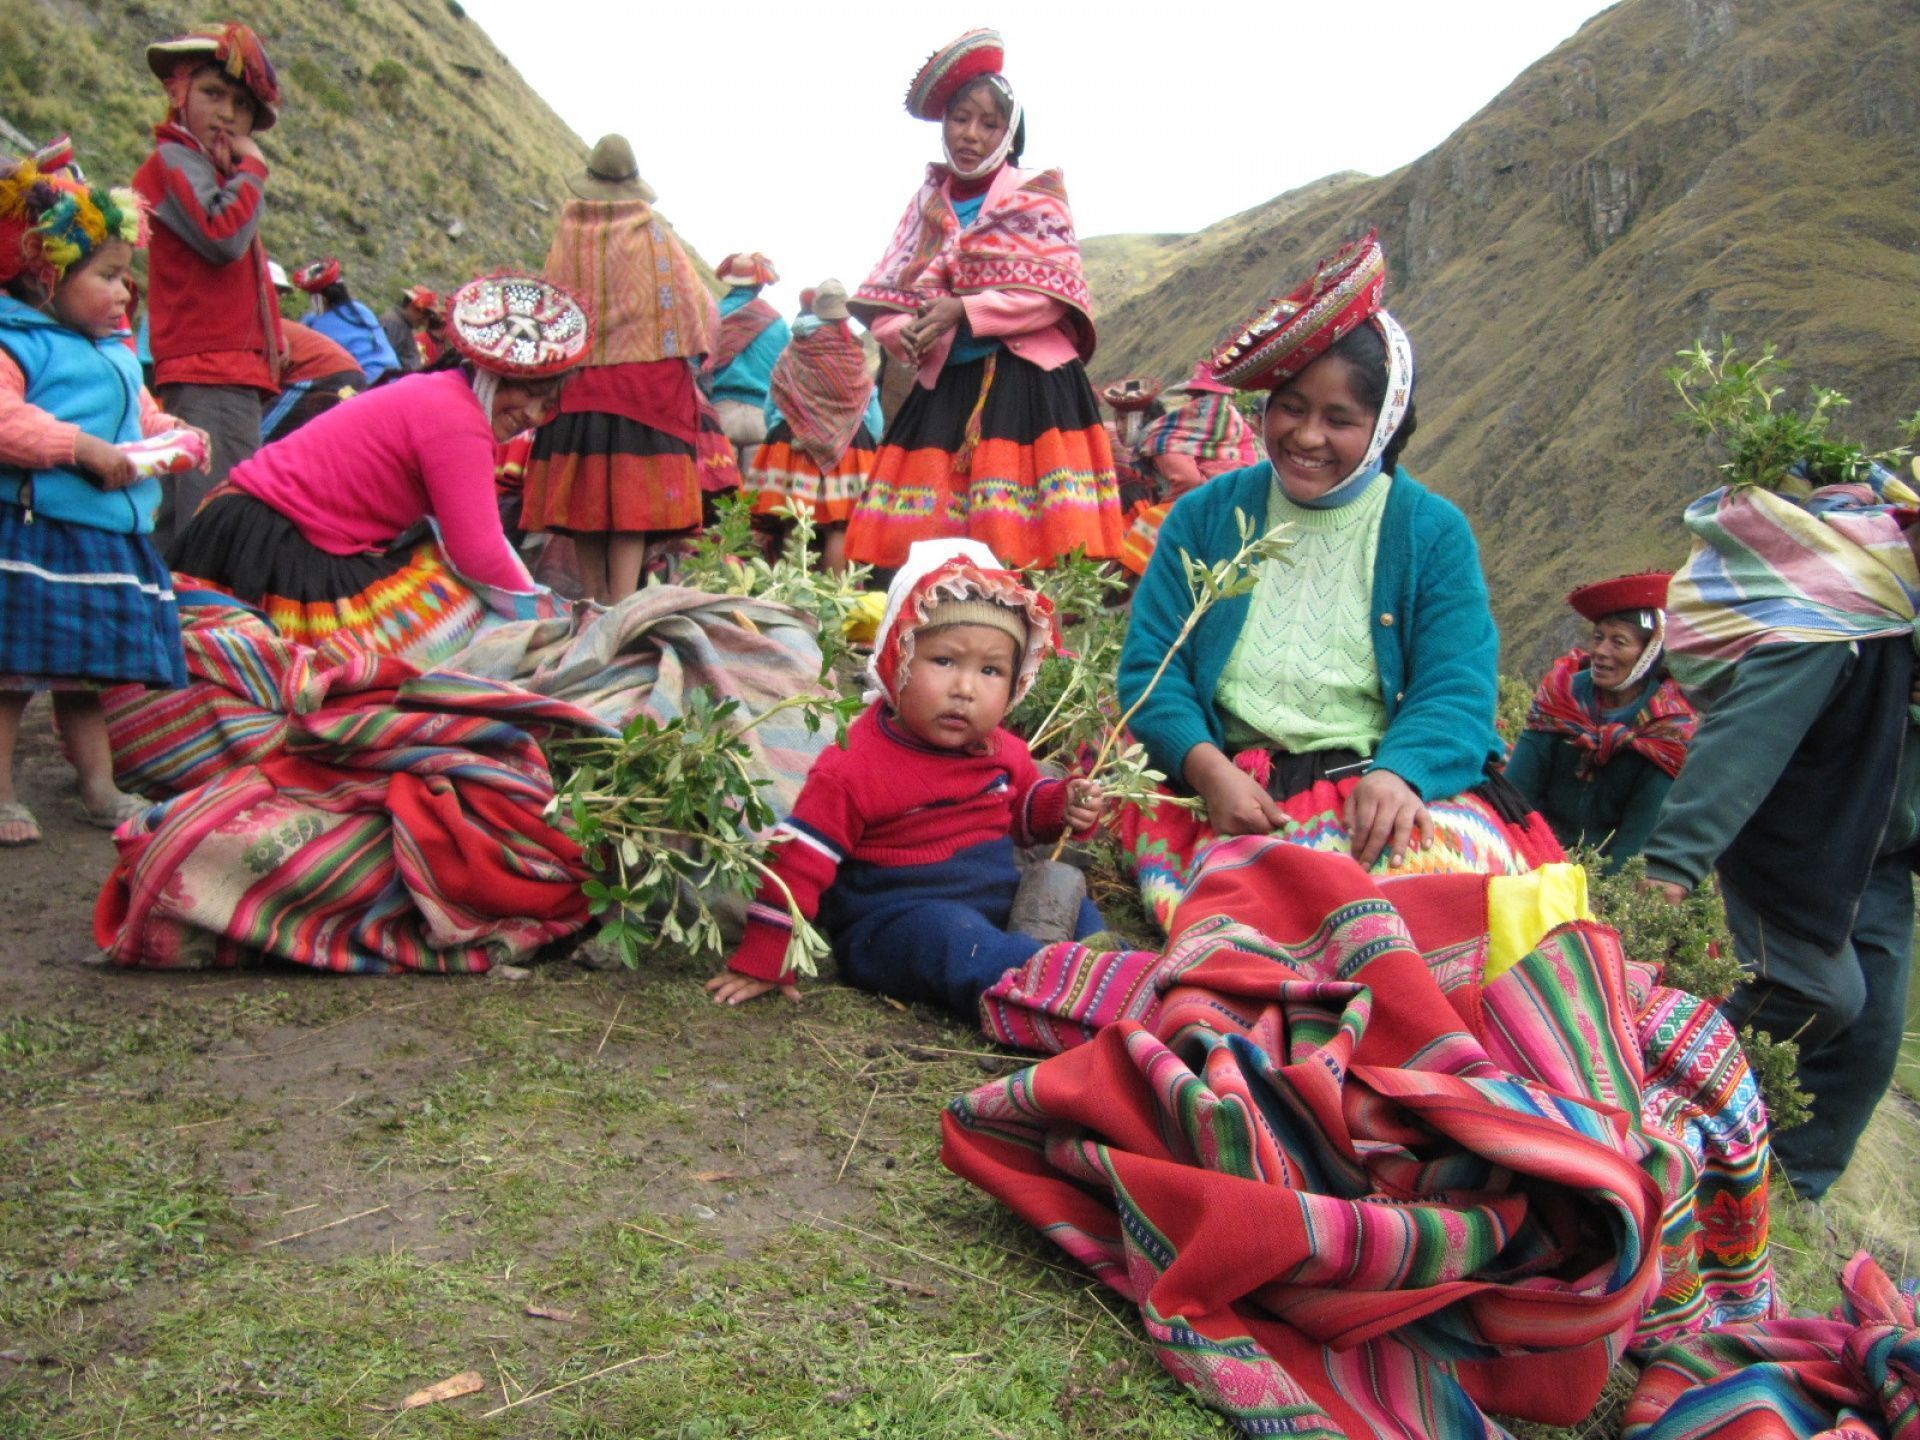 We&#039;ve helped to plant 67,000 trees in Peru